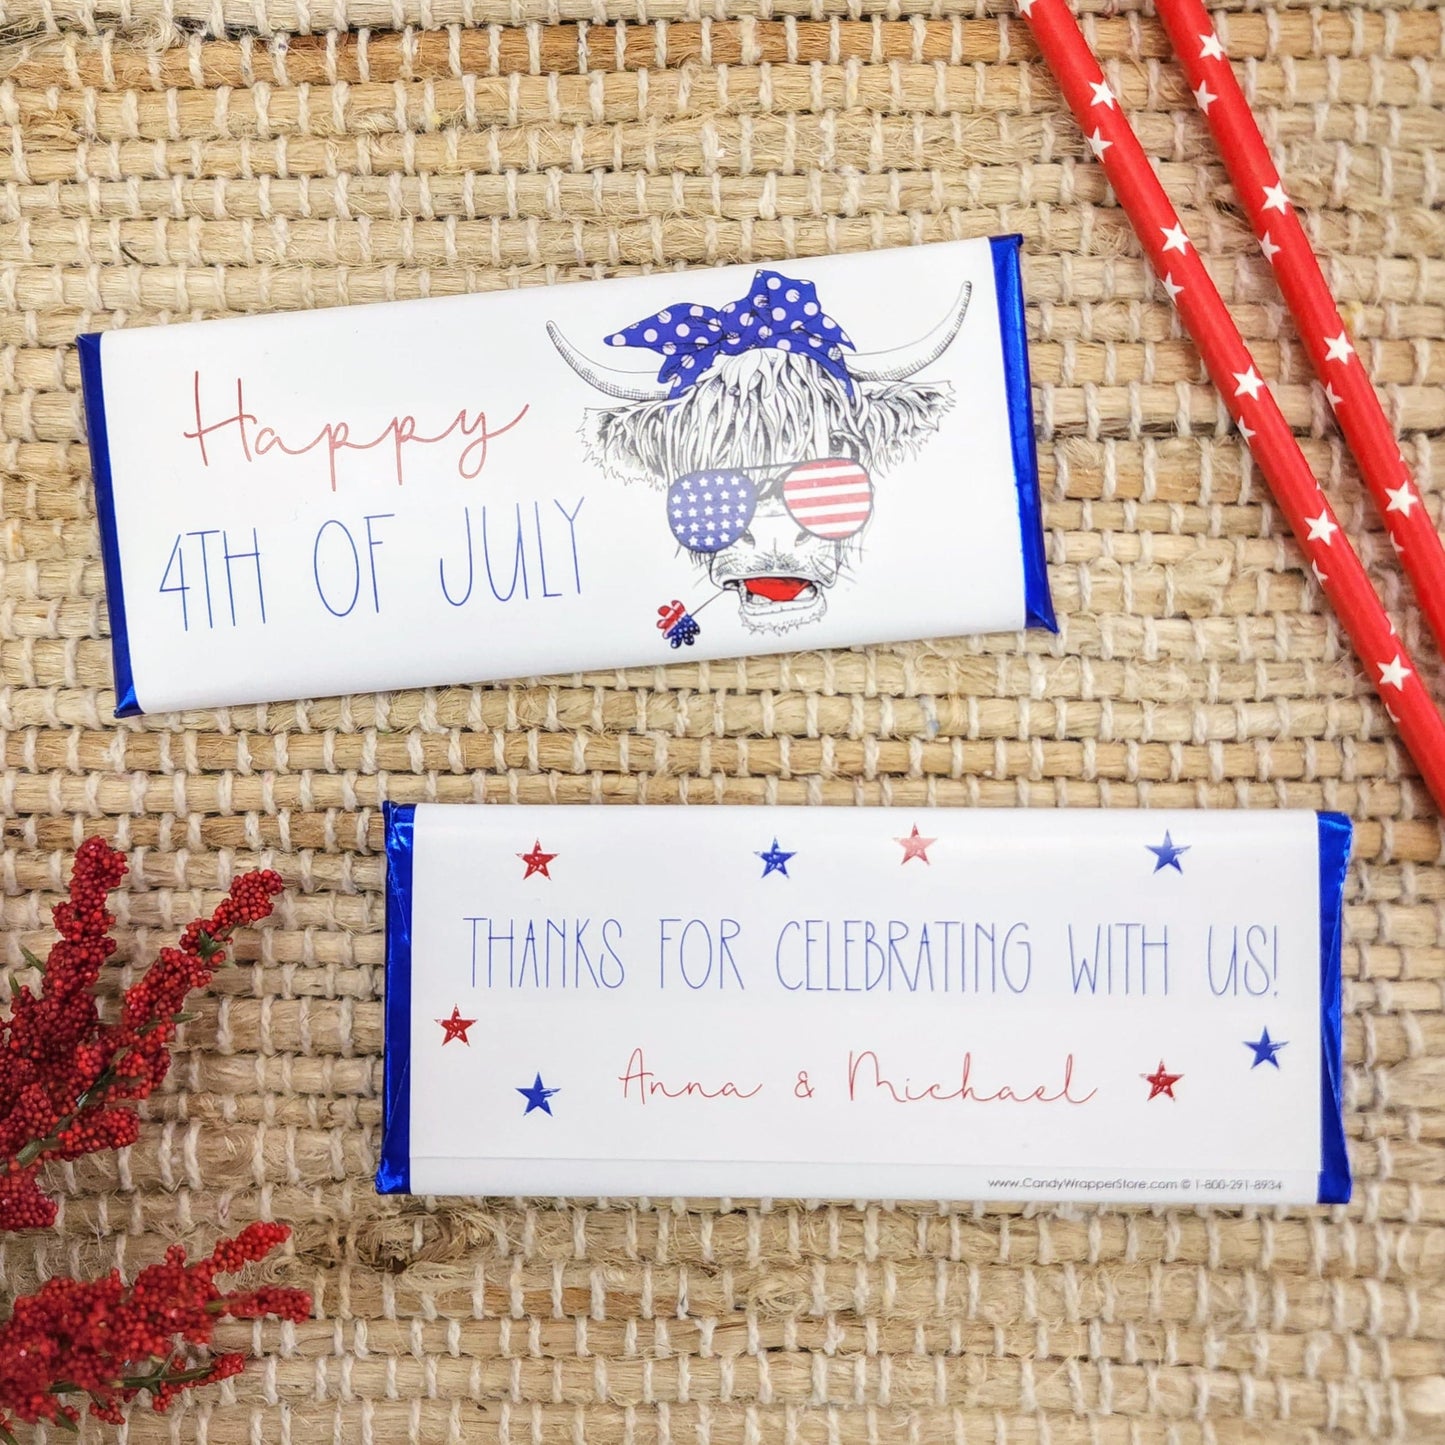 IND212 - Highland Cow 4th of July Candy Bar Wrapper Highland Cow 4th of July Candy Bar Wrapper Candy Wrapper Store